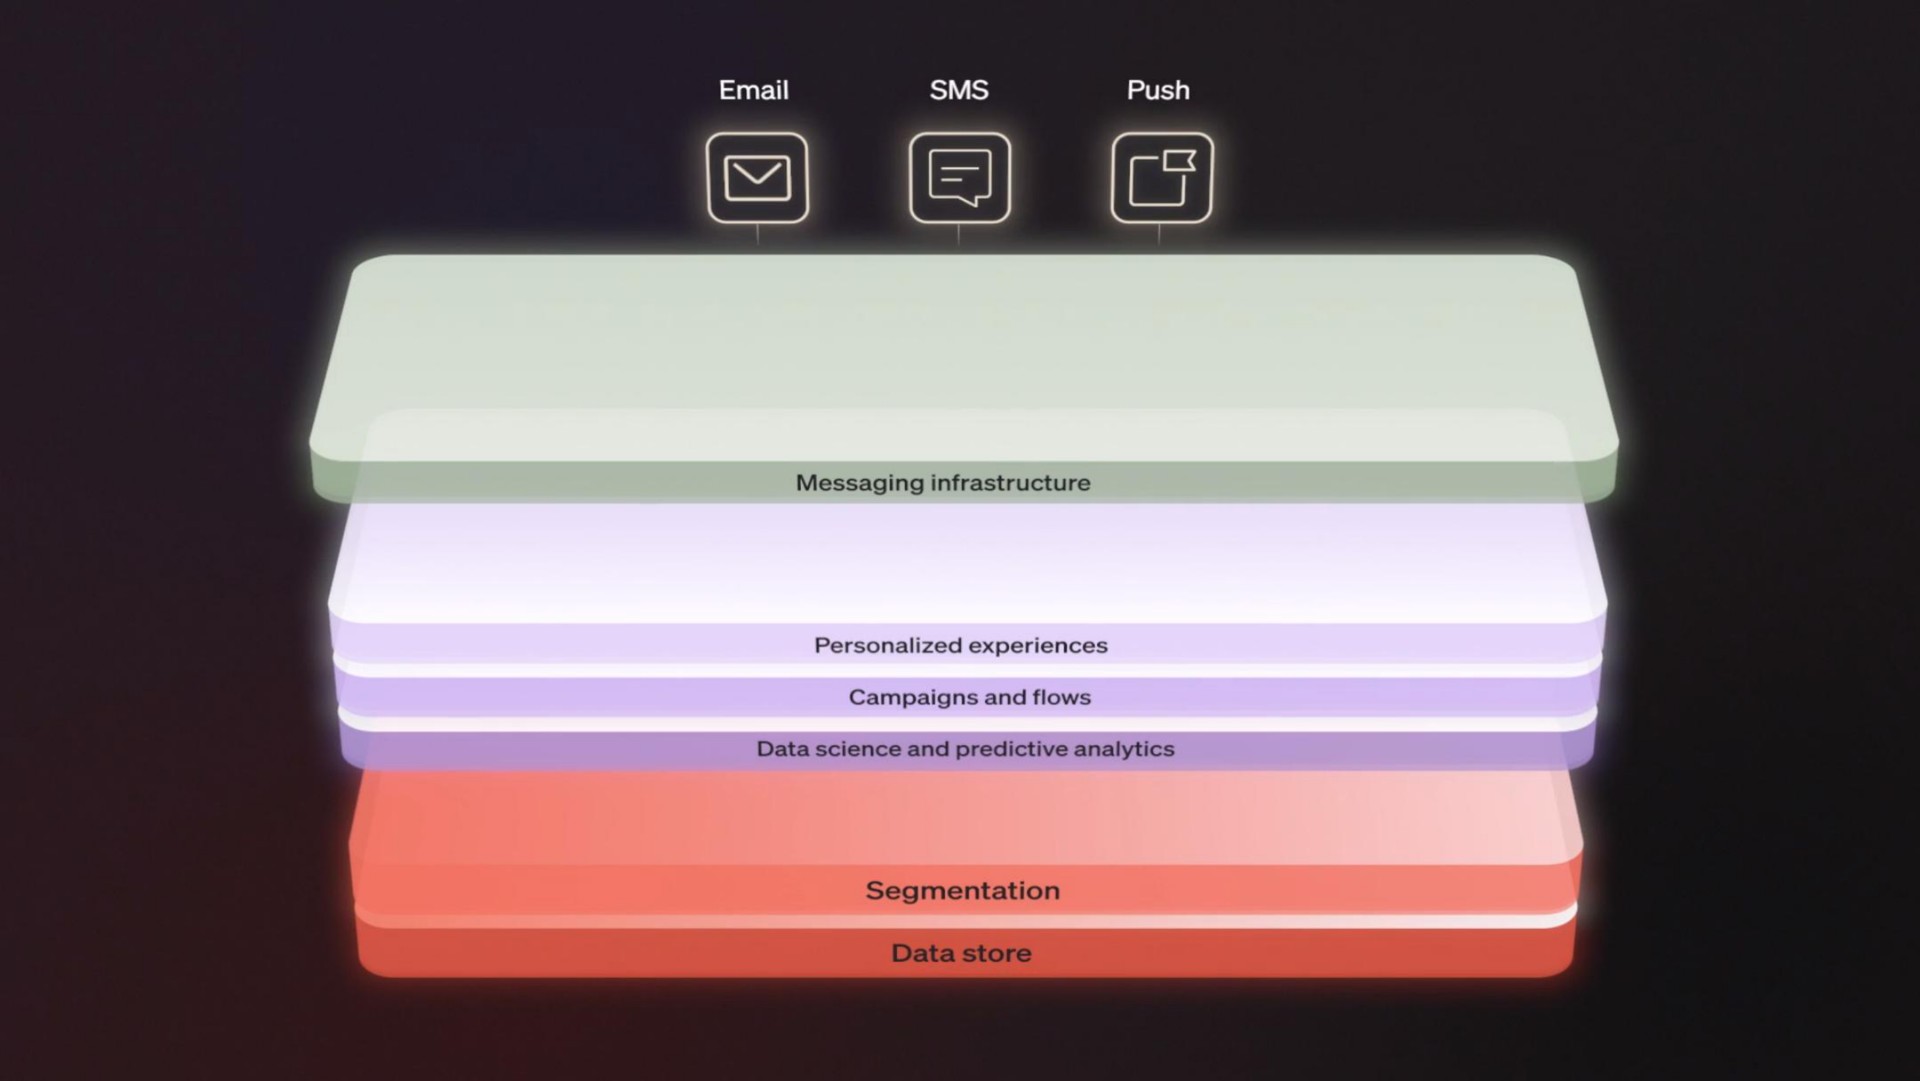 push messaging infrastructure personalized experiences segmentation data science and predictive analytics campaigns and flows | Klaviyo